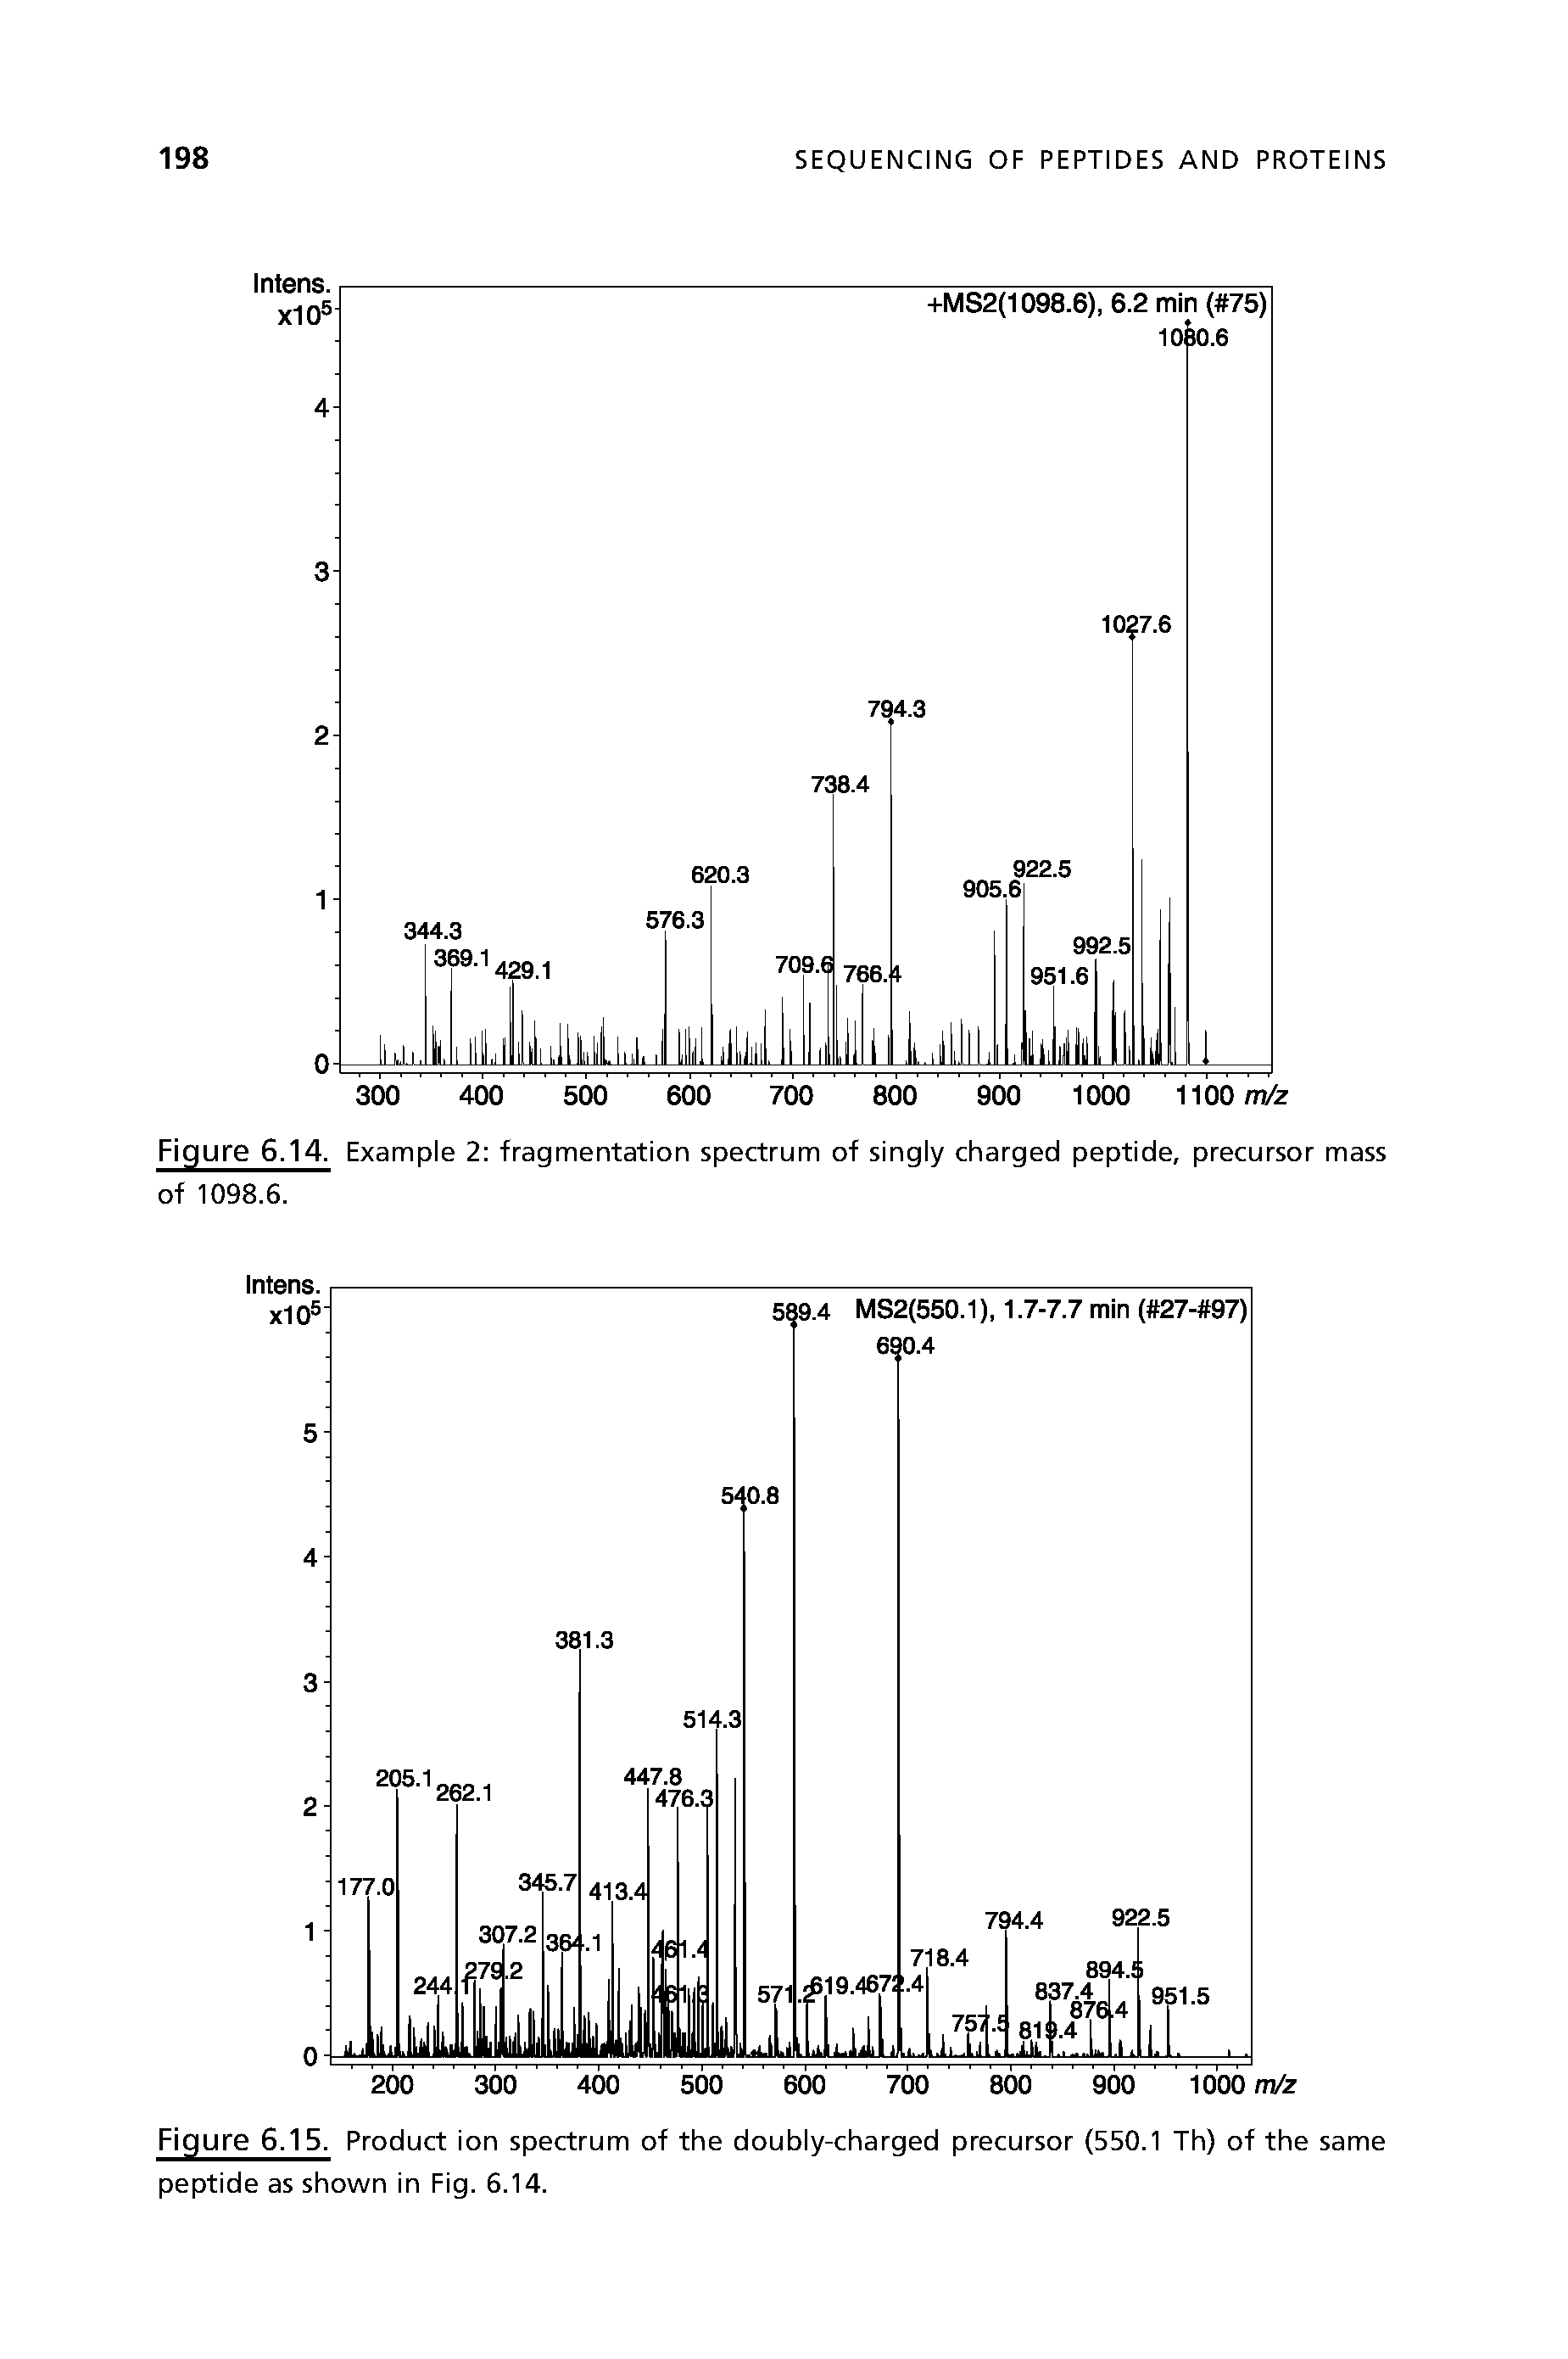 Figure 6.15. Product ion spectrum of the doubly-charged precursor (550.1 Th) of the same peptide as shown in Fig. 6.14.